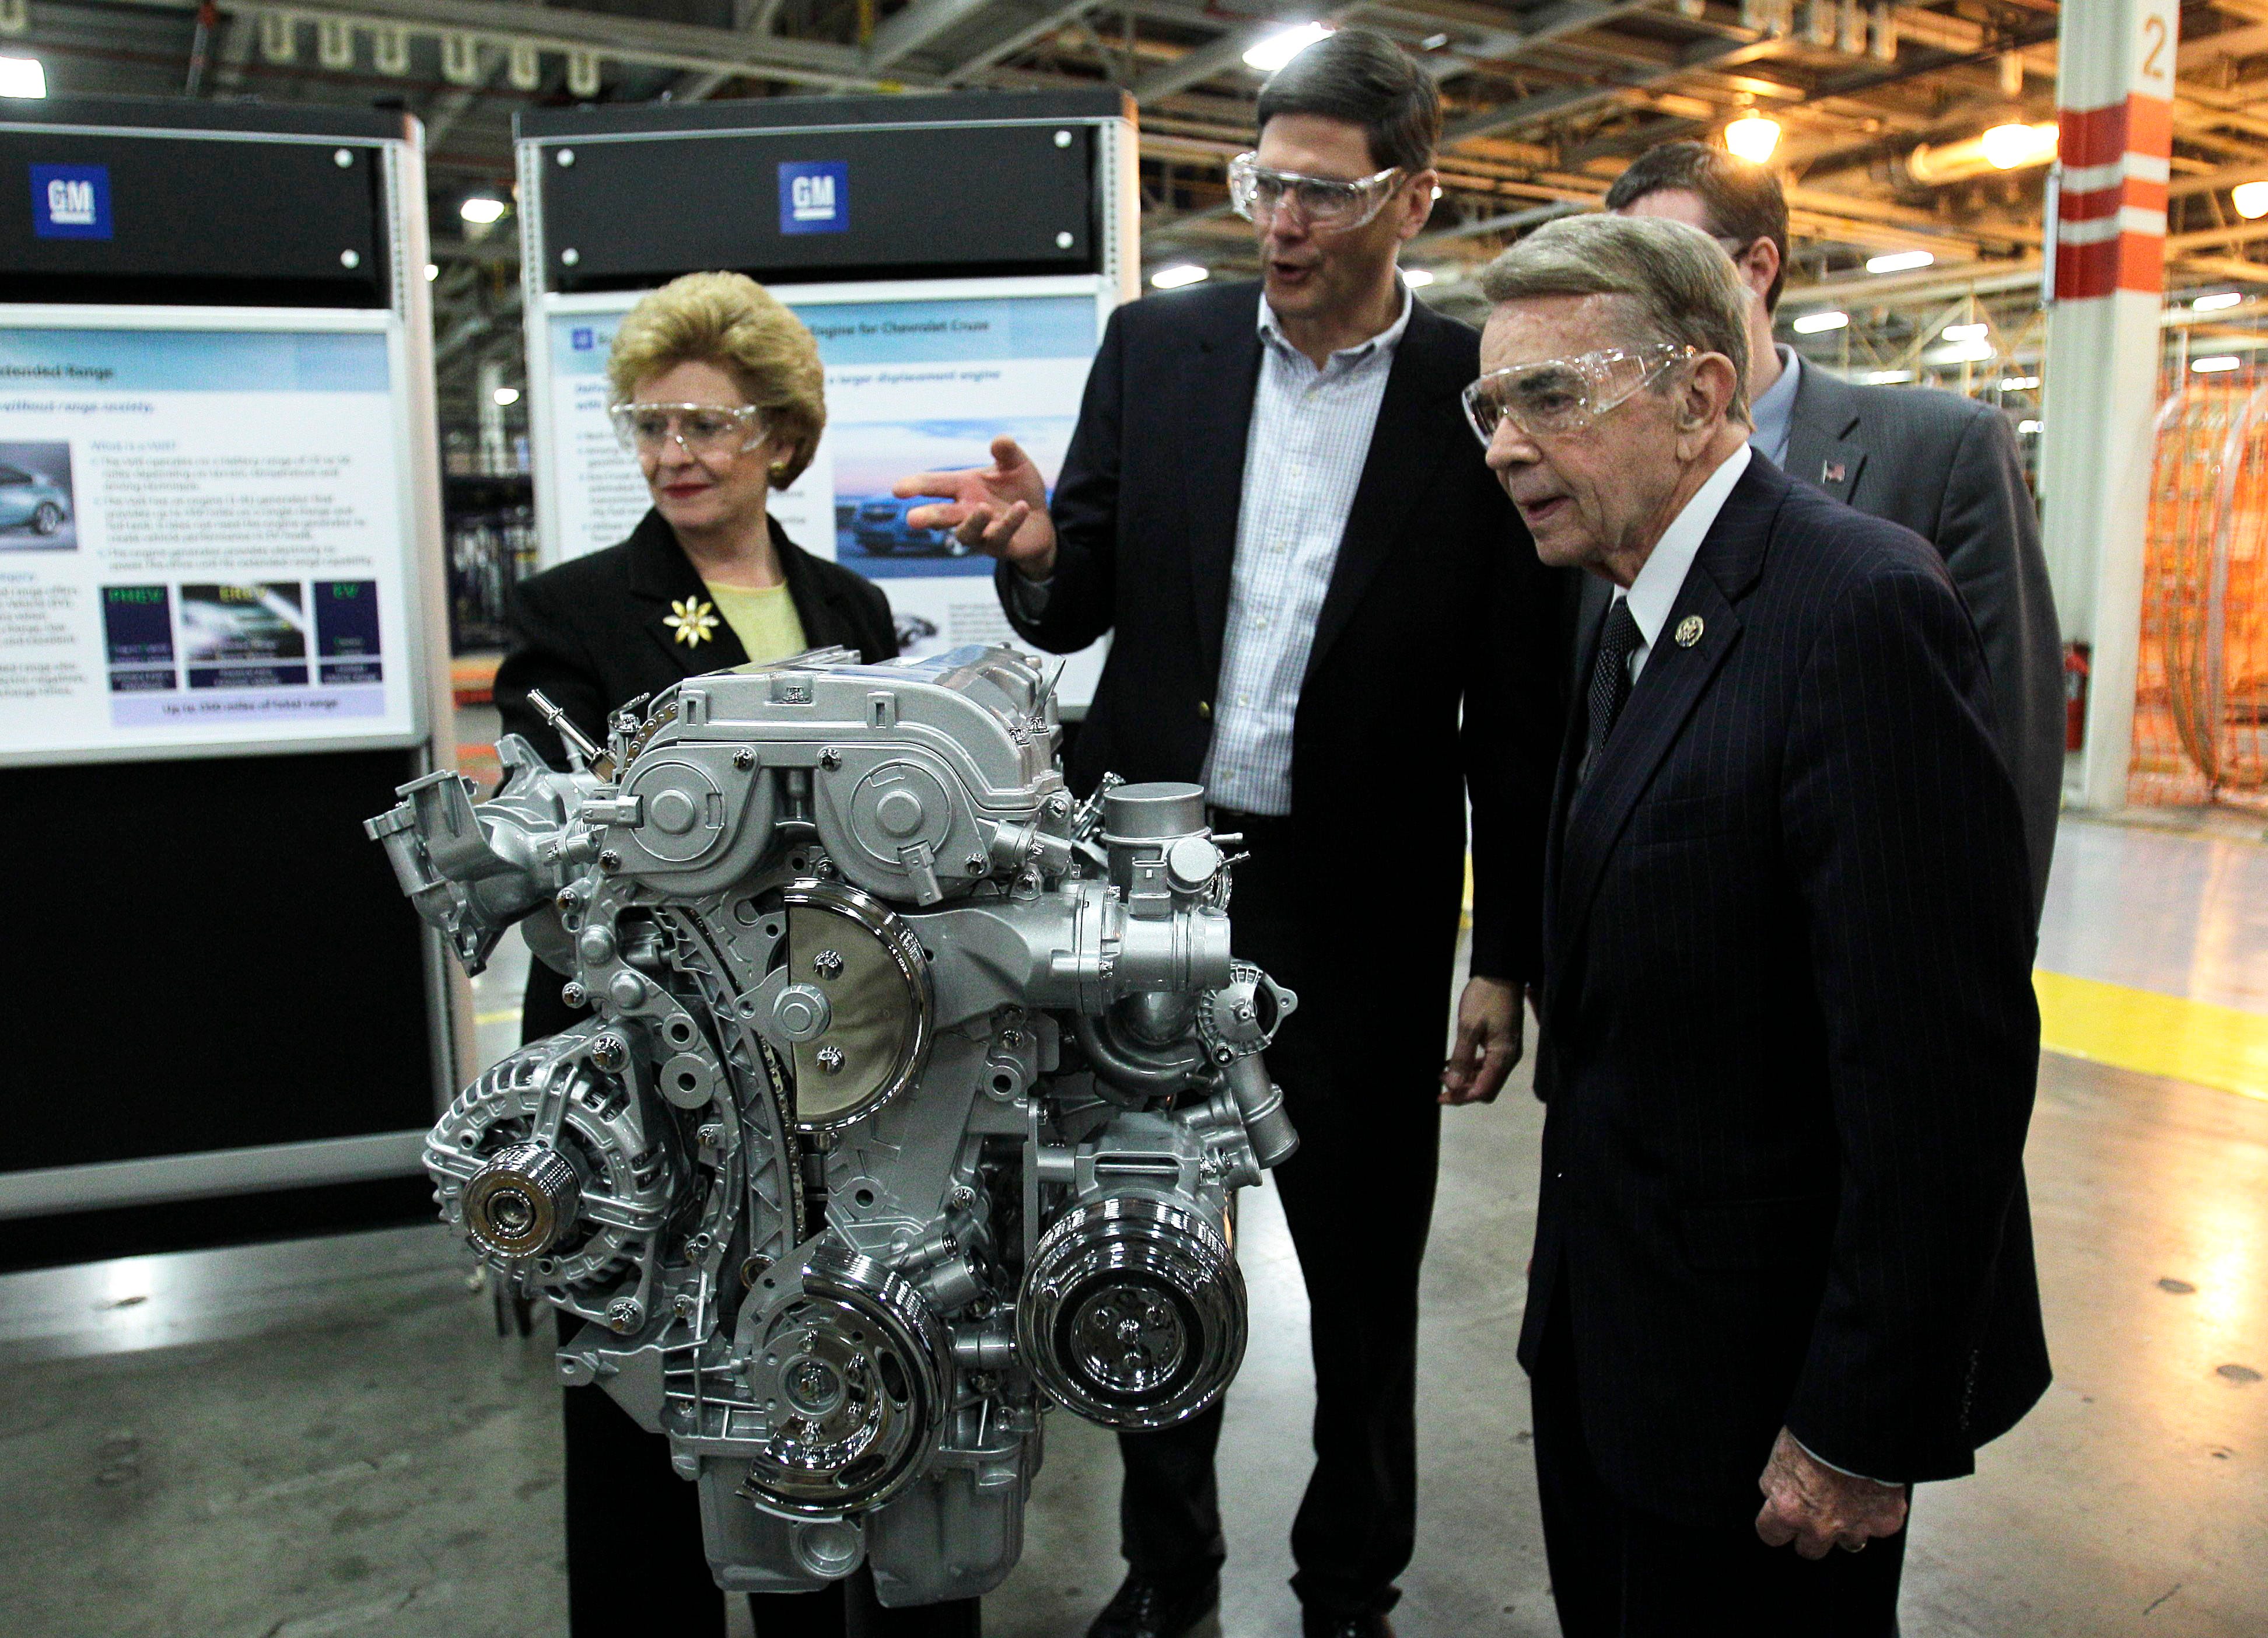 General Motors Assistant Chief Engineer Mike Katerberg, center, shows a model of a new engine to Sen. Debbie Stabenow, D-Lansing, and Rep. Dale Kildee at the Flint Engine plant on Nov. 24, 2010.